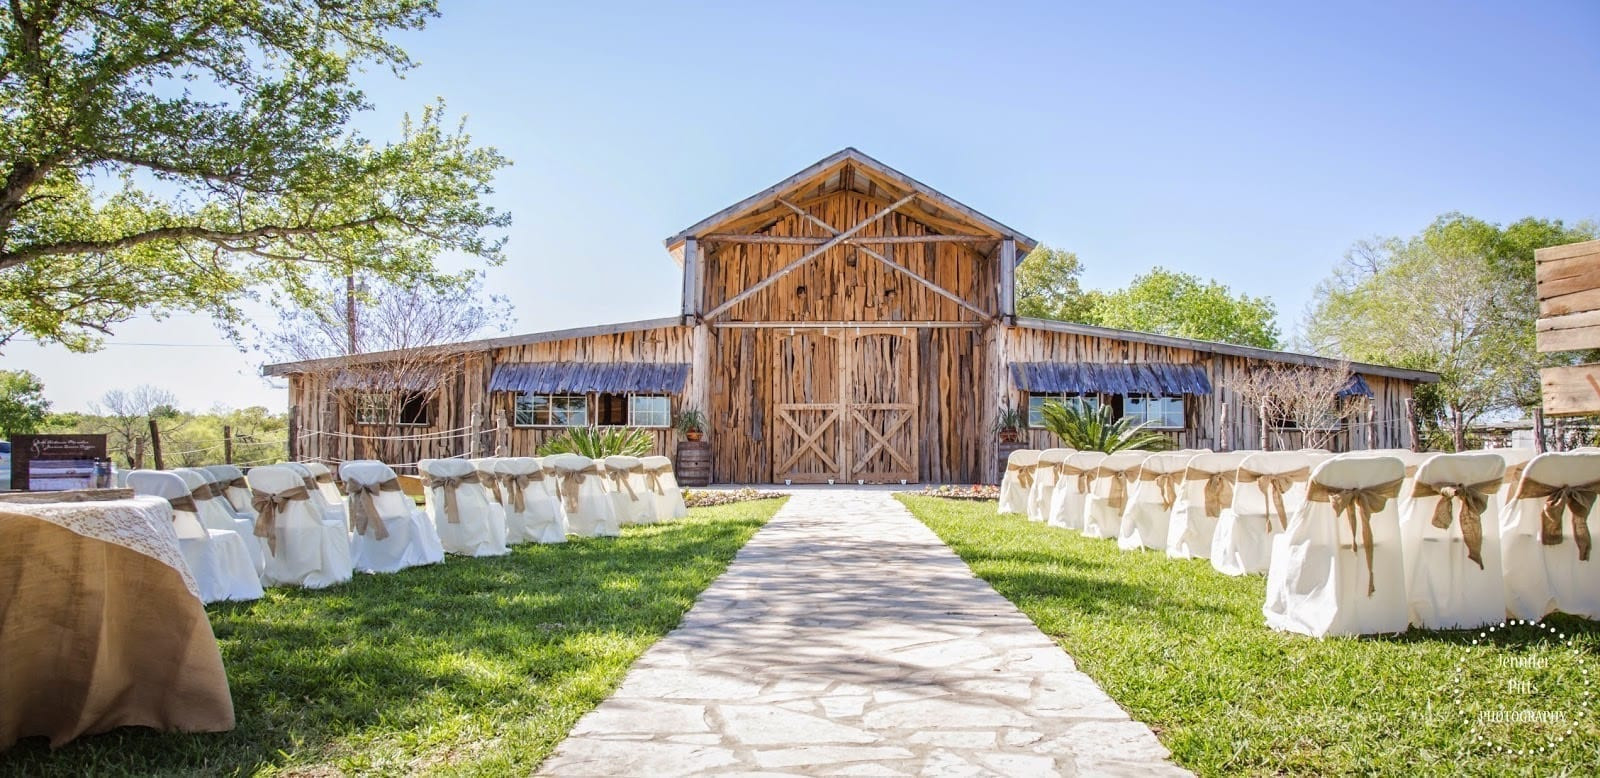 Barn Wedding Venues In Texas
 Rancho la Mission – Celebrate Life in Rustic Country Style